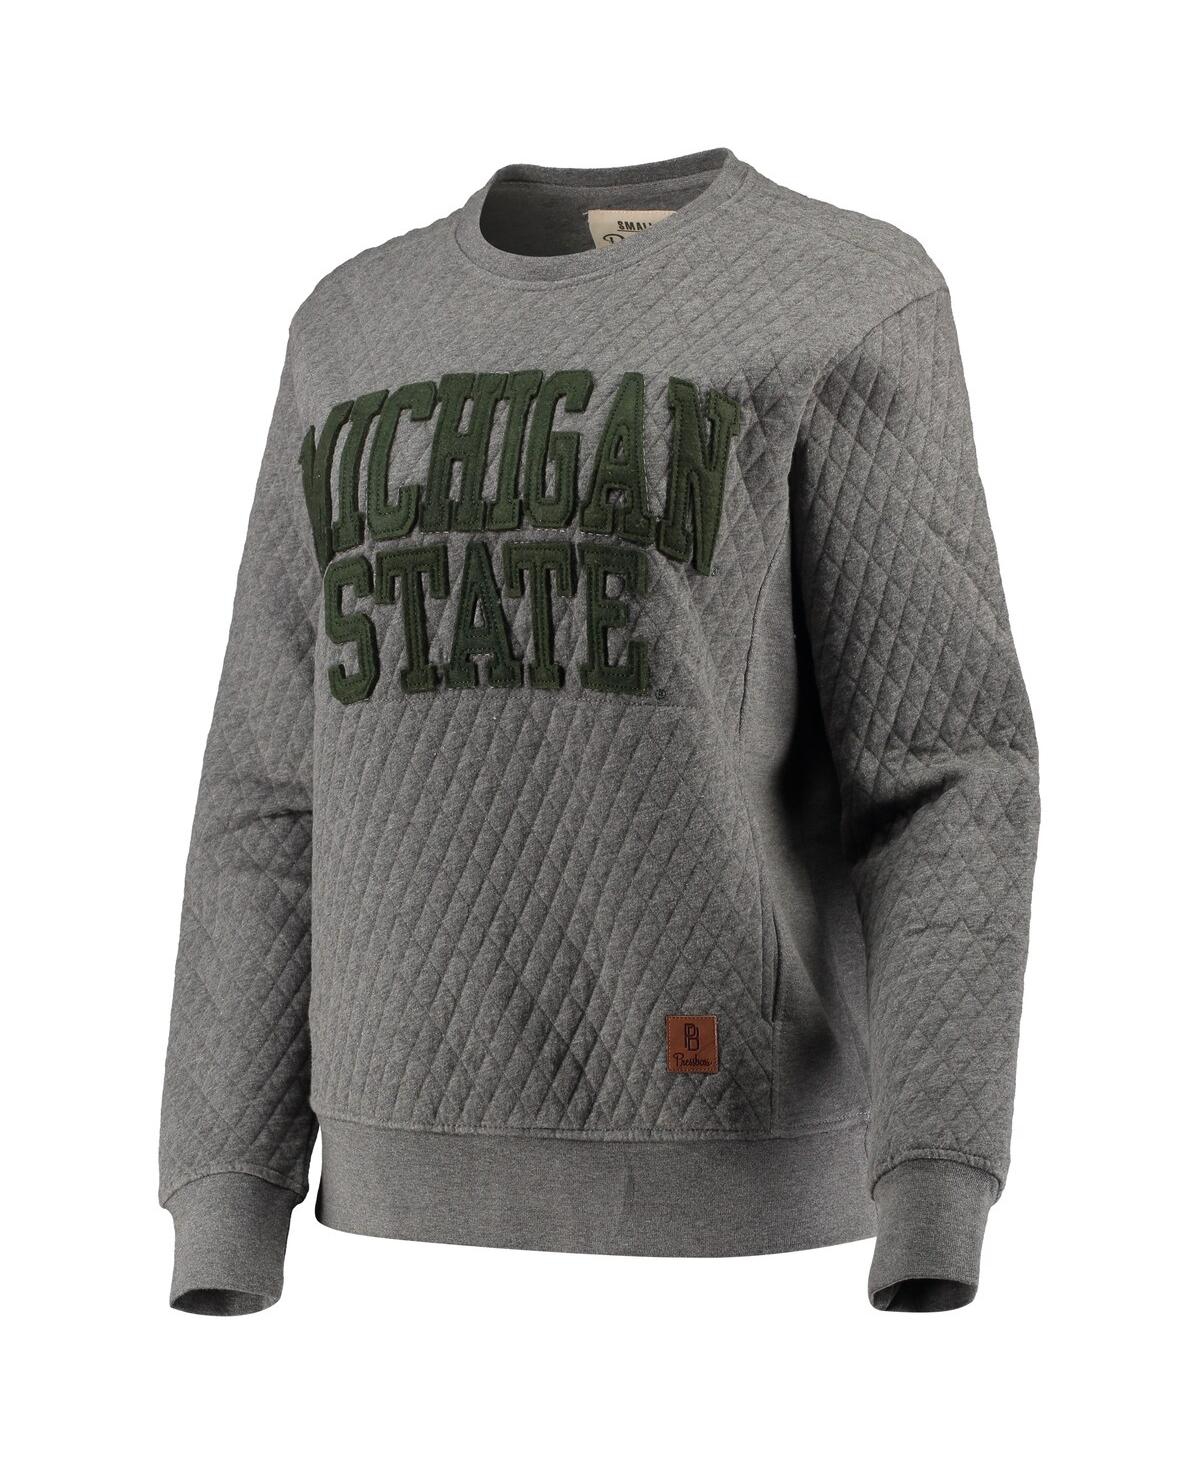 Shop Pressbox Women's  Heather Charcoal Michigan State Spartans Moose Quilted Pullover Sweatshirt